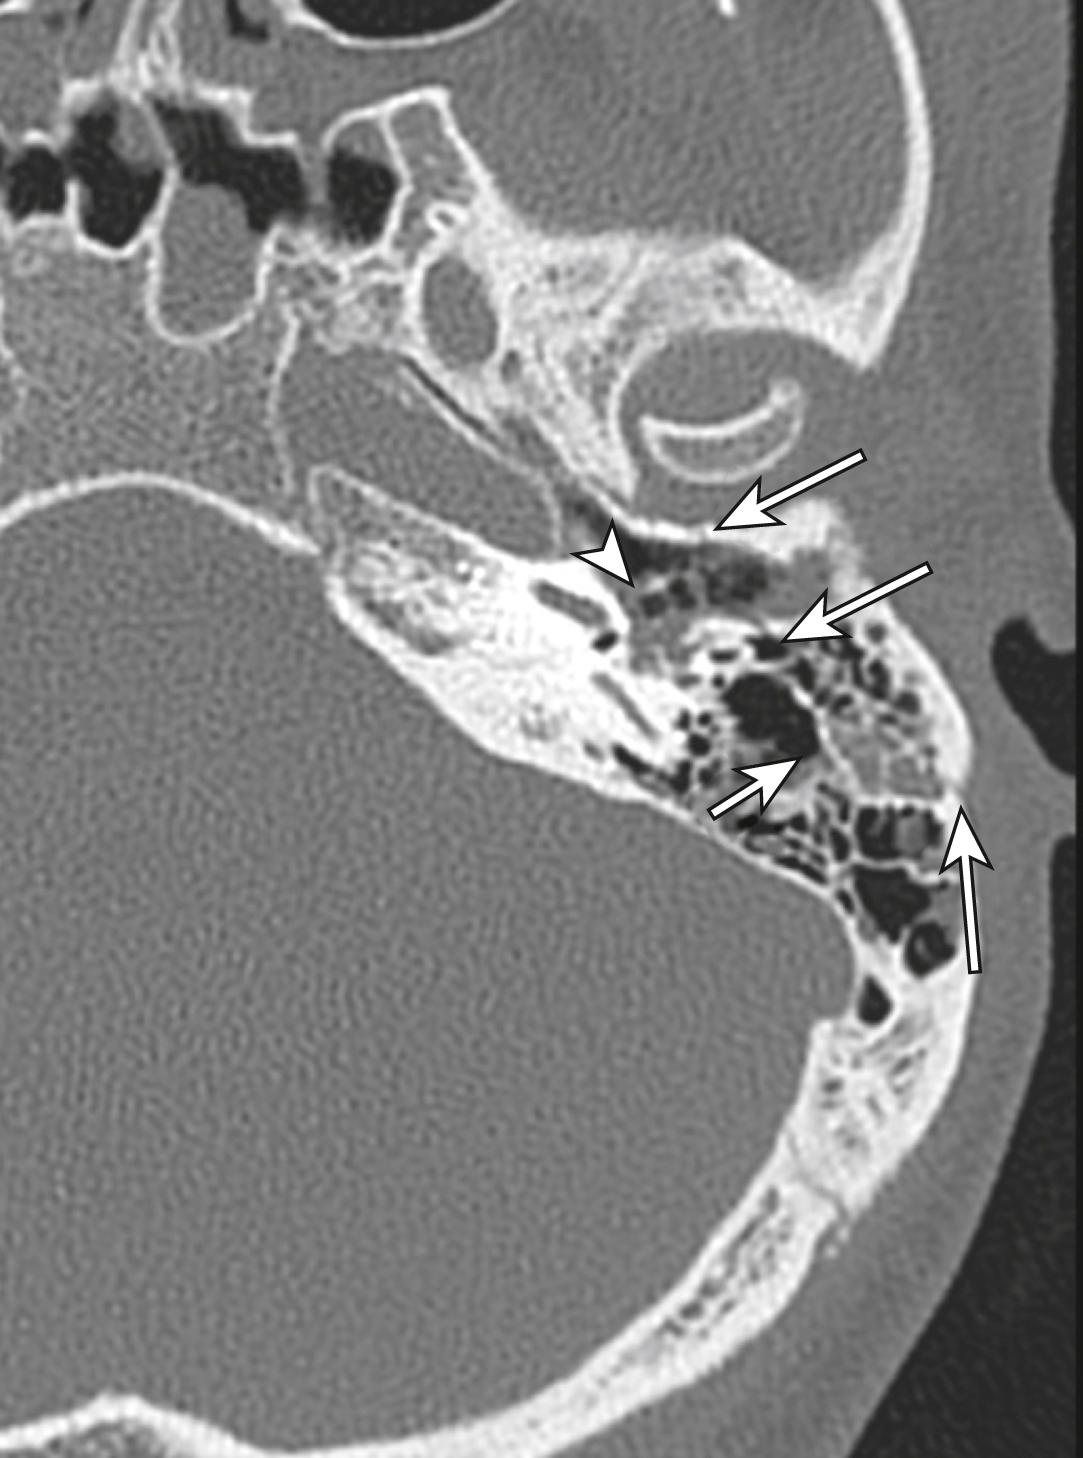 FIG. 3.8.6, Base-of-Skull Fracture in a Trauma Patient.